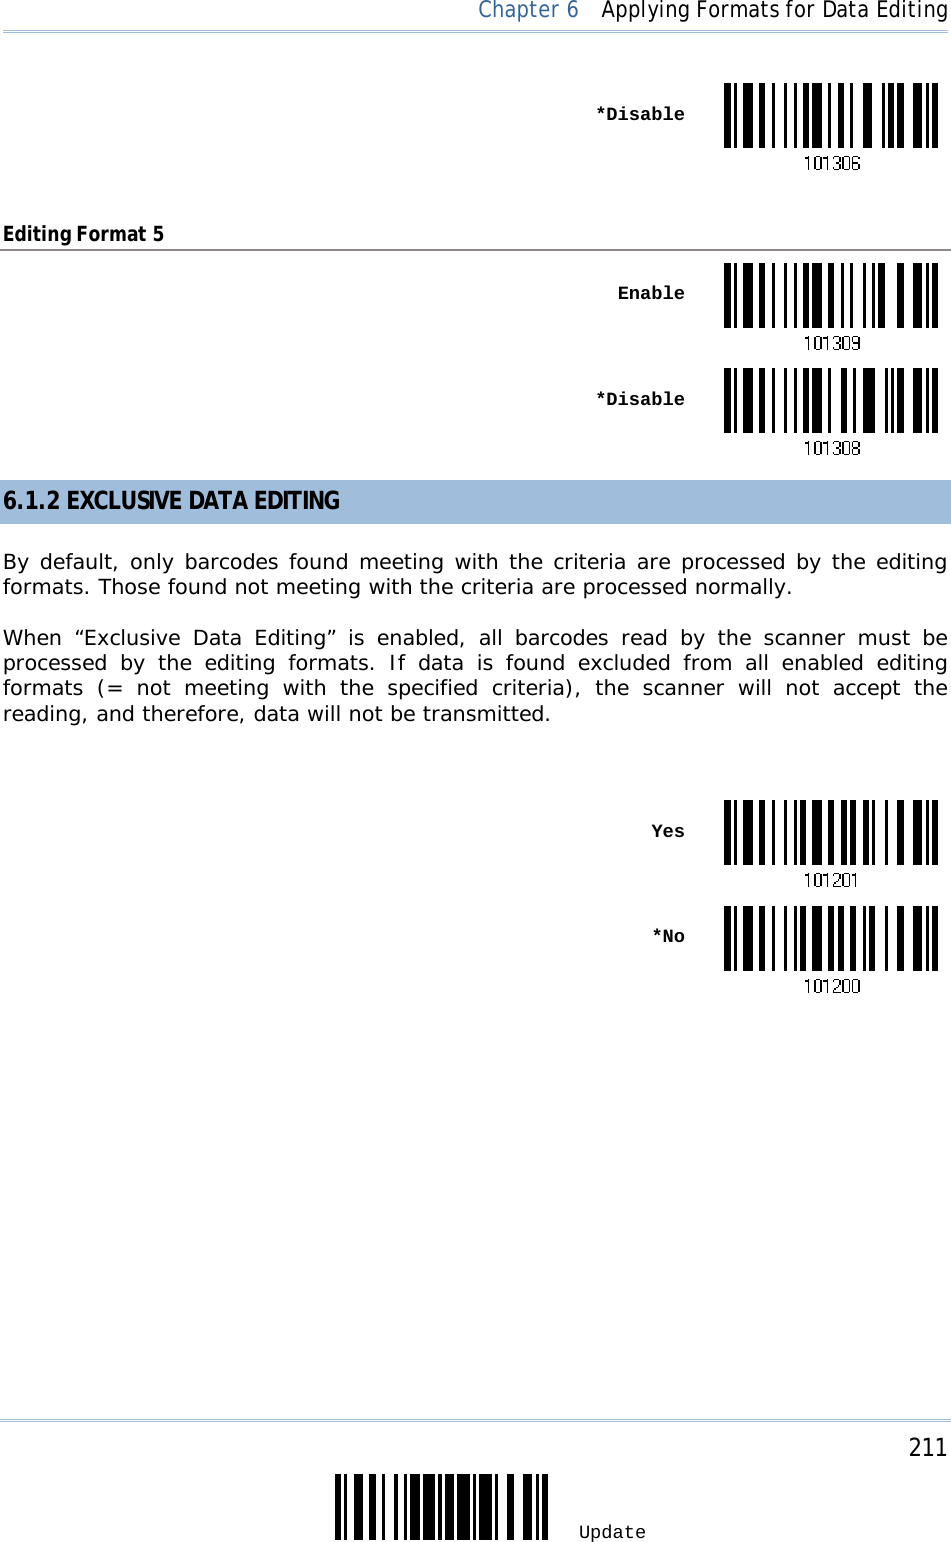     211 Update  Chapter 6  Applying Formats for Data Editing  *Disable Editing Format 5  Enable *Disable6.1.2 EXCLUSIVE DATA EDITING By default, only barcodes found meeting with the criteria are processed by the editing formats. Those found not meeting with the criteria are processed normally. When “Exclusive Data Editing” is enabled, all barcodes read by the scanner must be processed by the editing formats. If data is found excluded from all enabled editing formats (= not meeting with the specified criteria), the scanner will not accept the reading, and therefore, data will not be transmitted.   Yes *No                  